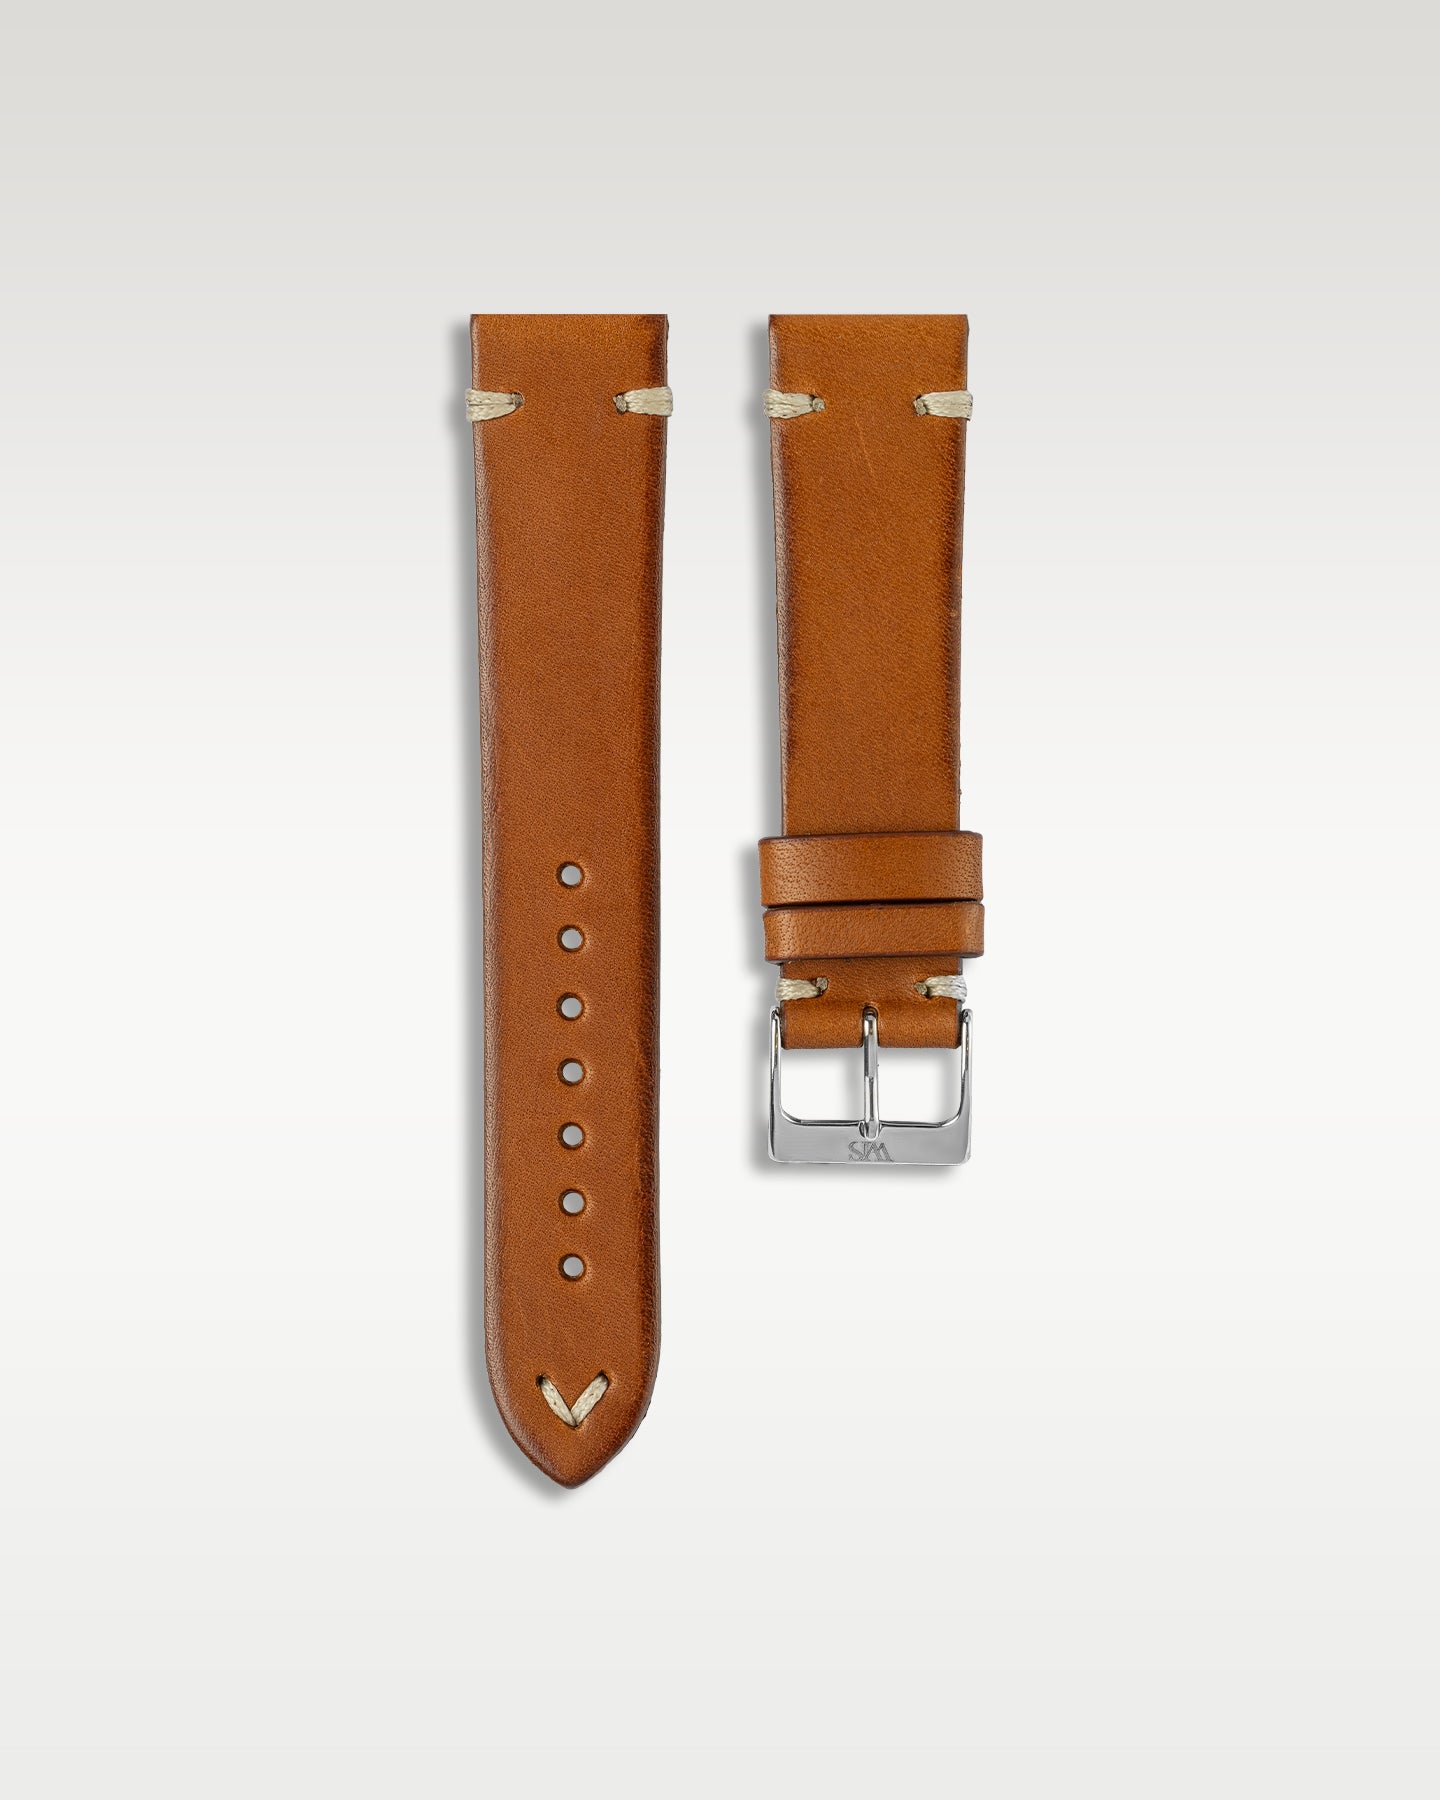 Handmade Italian Leather Strap in Brown Suede